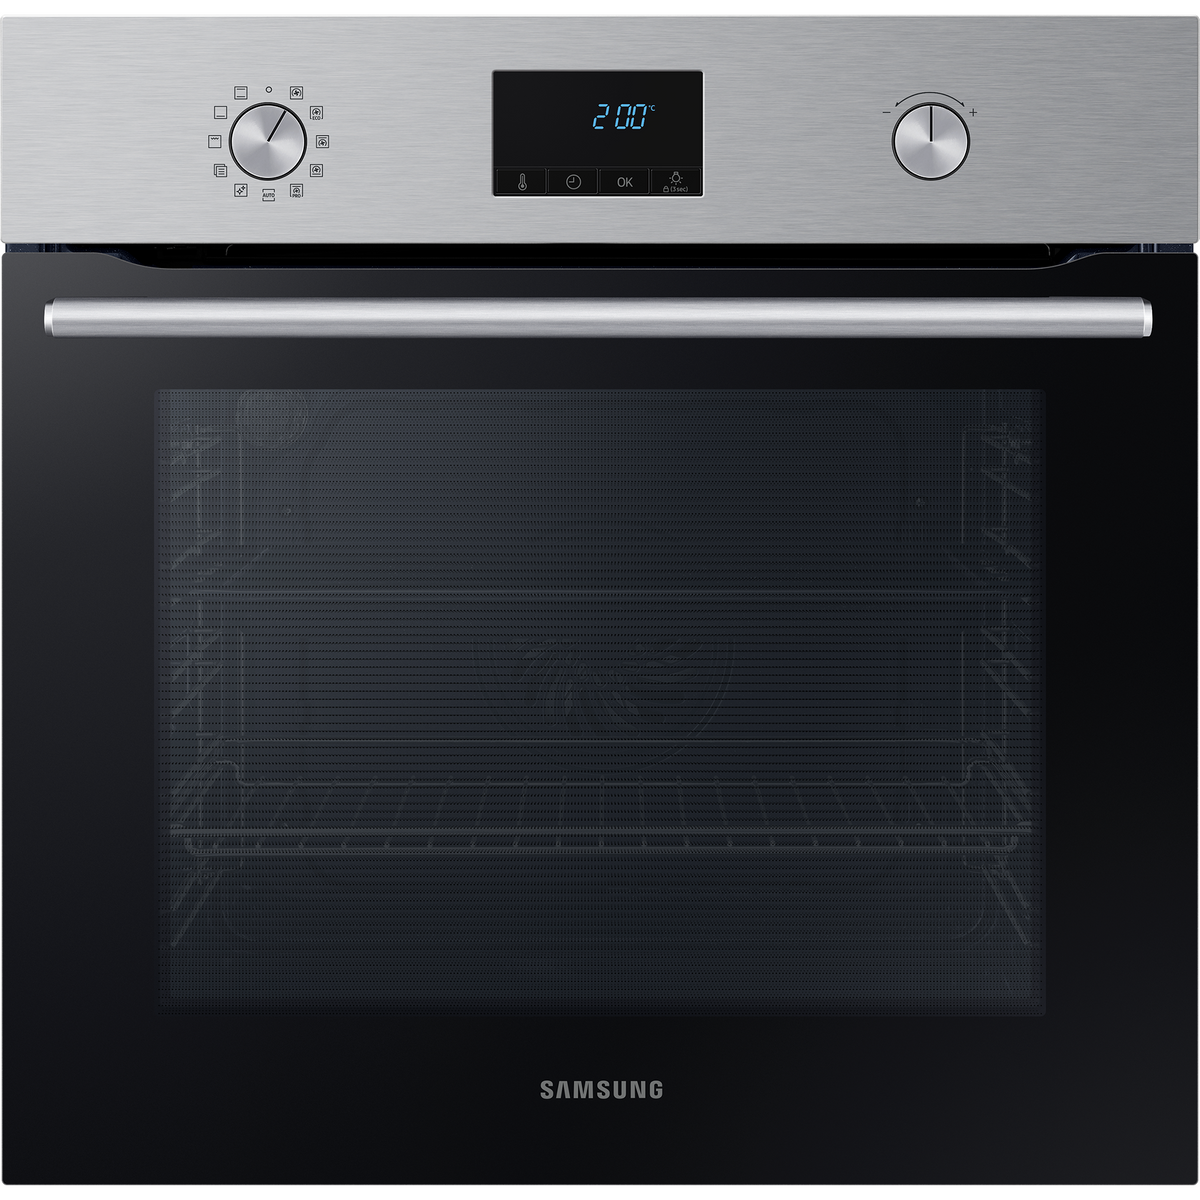 Samsung 68L Built-In Electric Single Oven - Stainless Steel | NV68A1170BS/EU from Samsung - DID Electrical